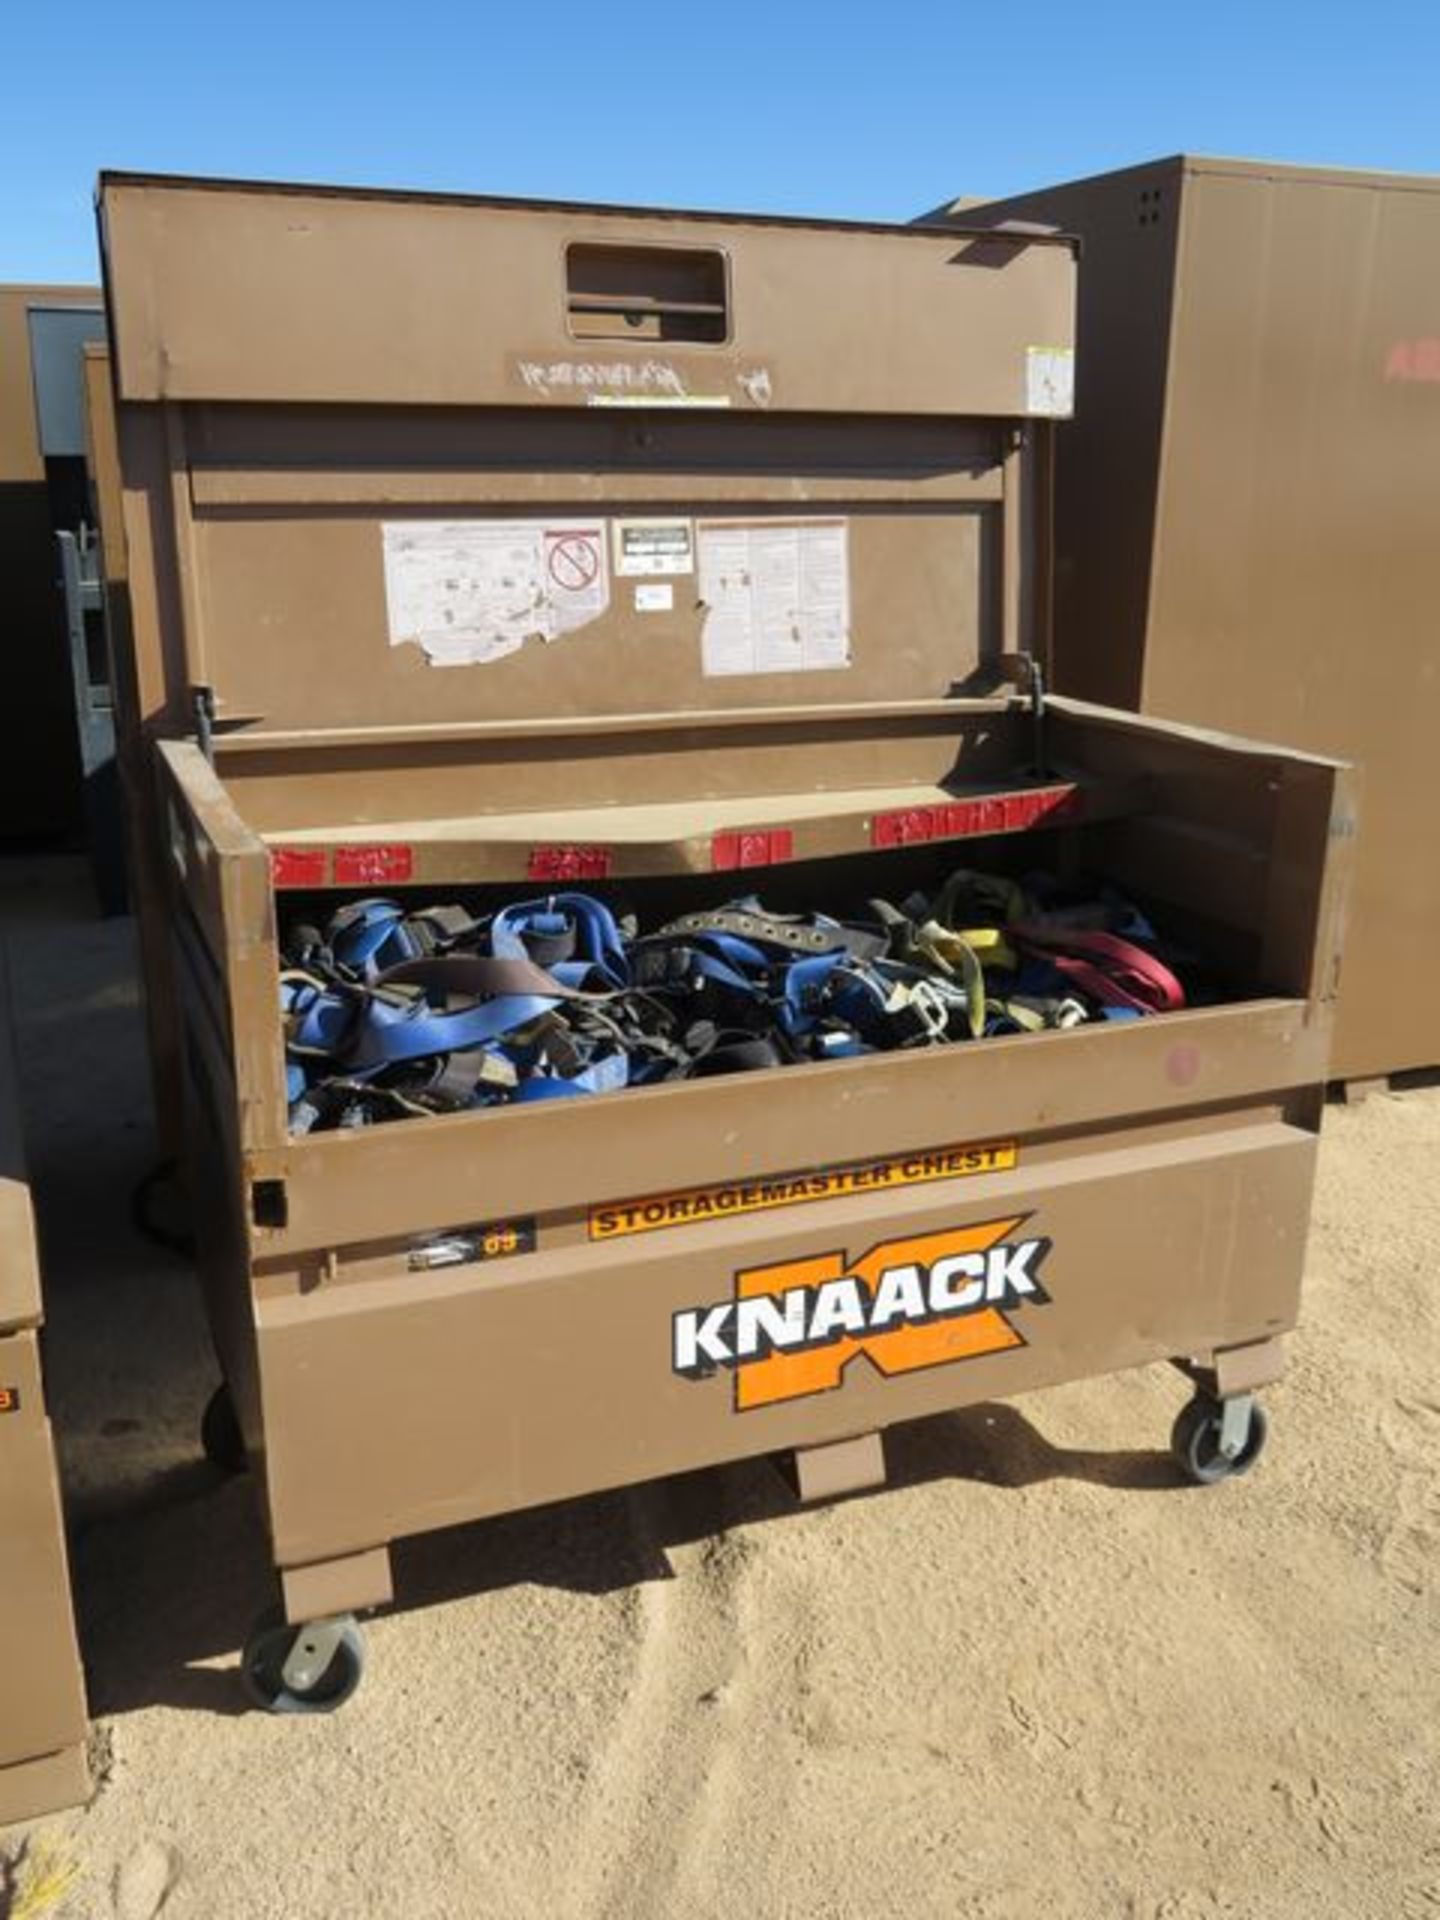 Knaack 69 Storage Tool Chest. 61" x 31" x 45"H, on Castors, w/ Contents of Safety Harnesses. Asset - Image 2 of 3